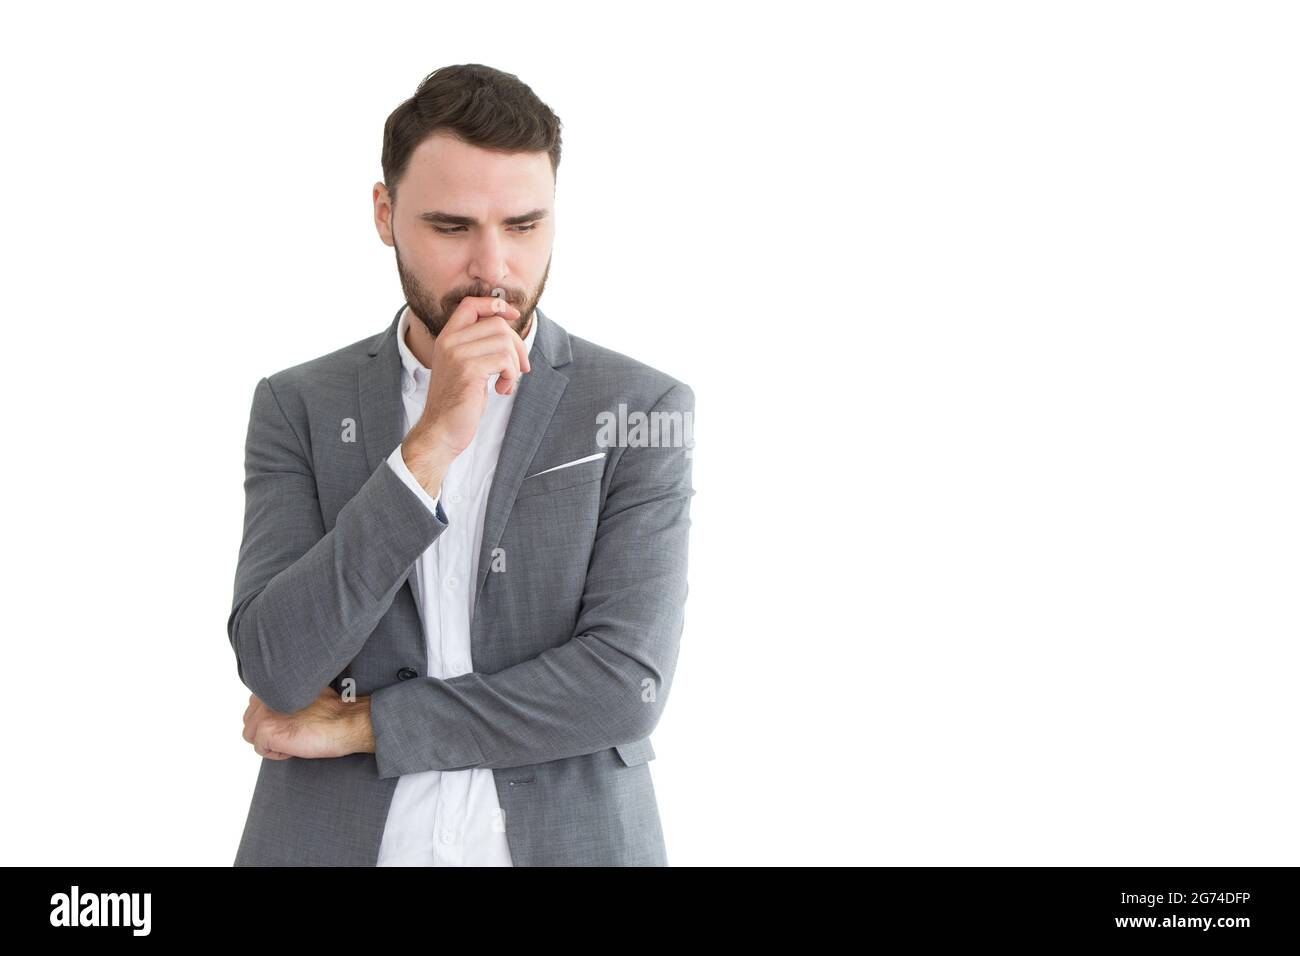 Business man thinking stress or consider make a decision posture isolated on white background. male forget mistake hesitate expression. Stock Photo